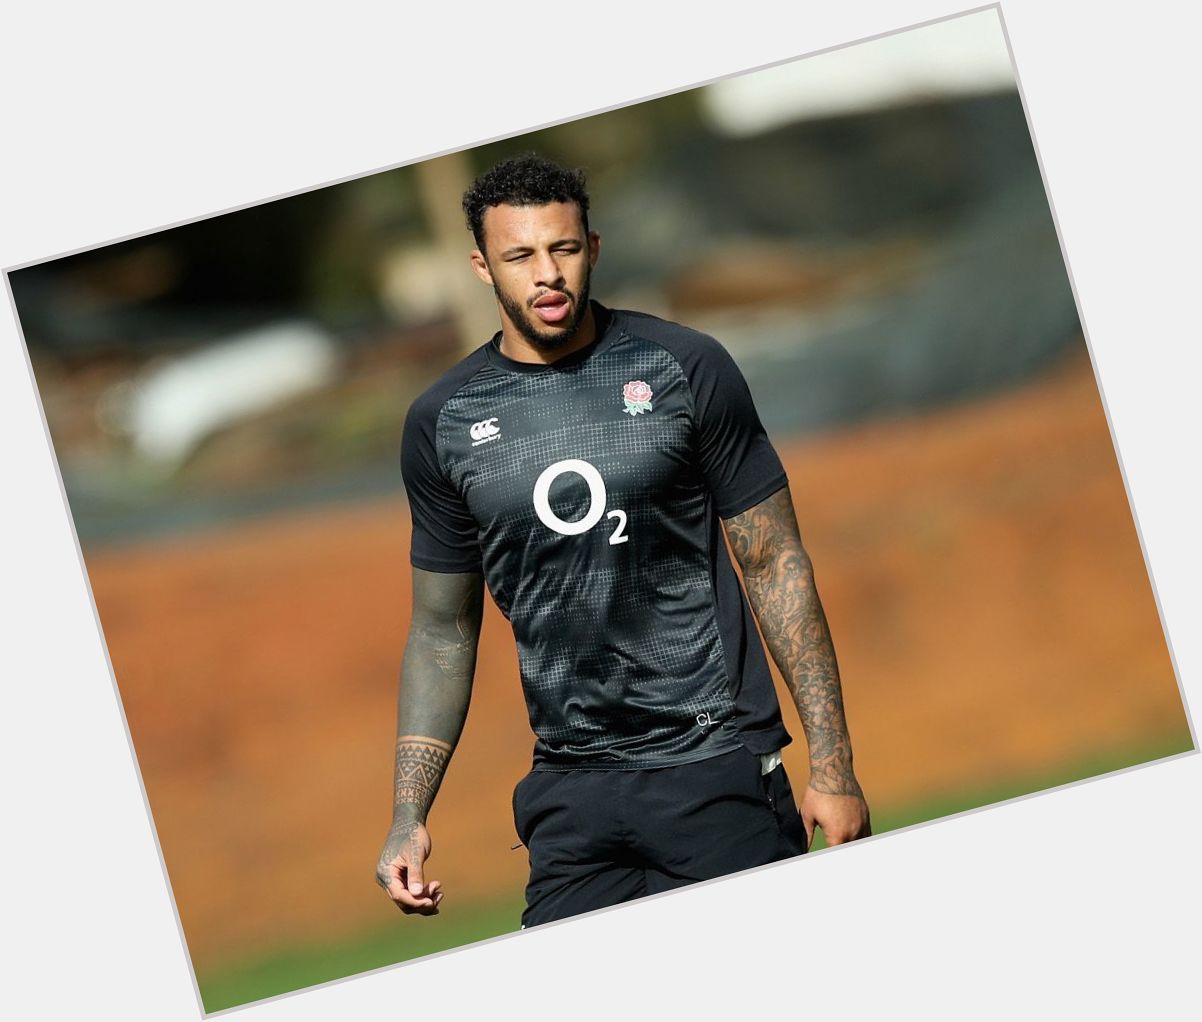 Https://fanpagepress.net/m/C/Courtney Lawes Exclusive Hot Pic 3